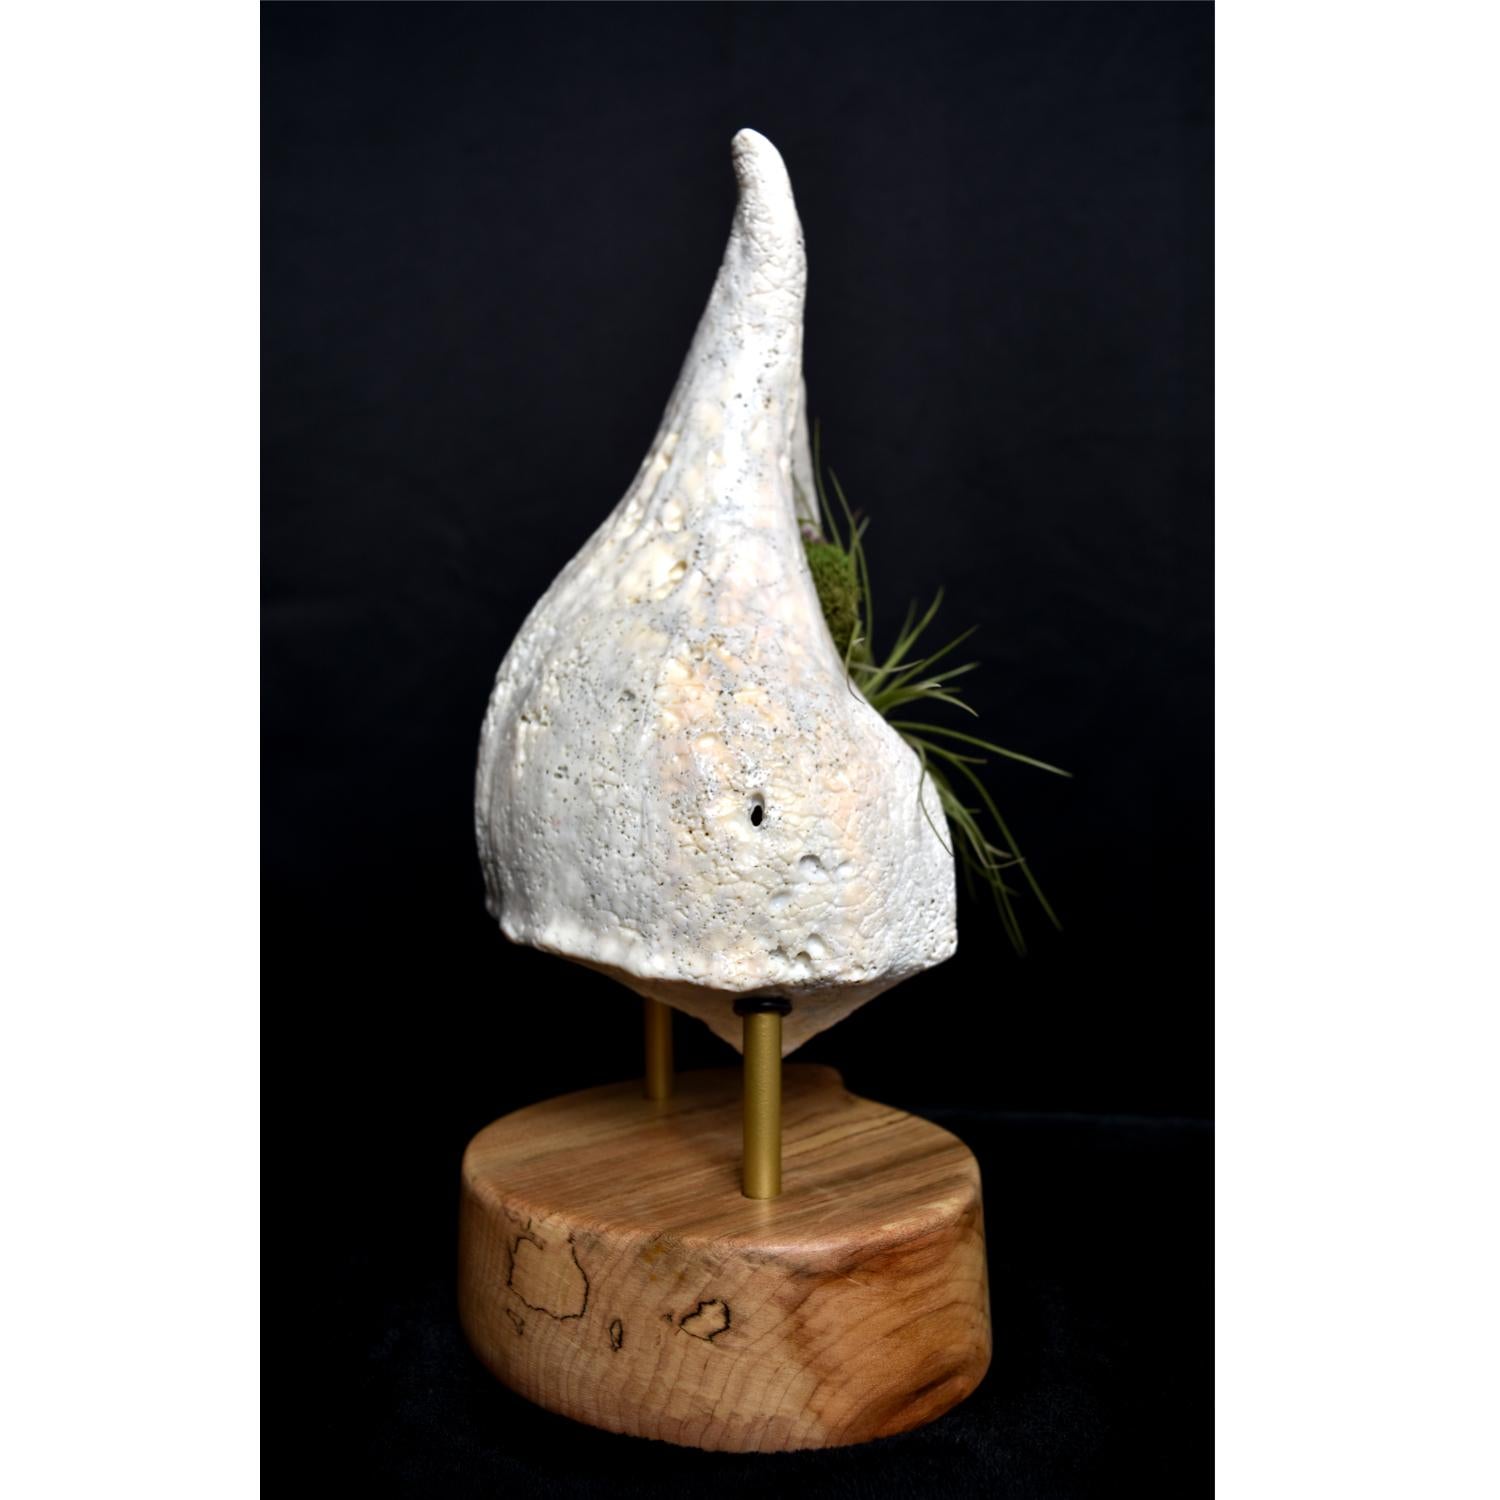 American Giant Whelk Conch Sea Shell Living Sculpture & Air Plant on Spalted Maple Base For Sale